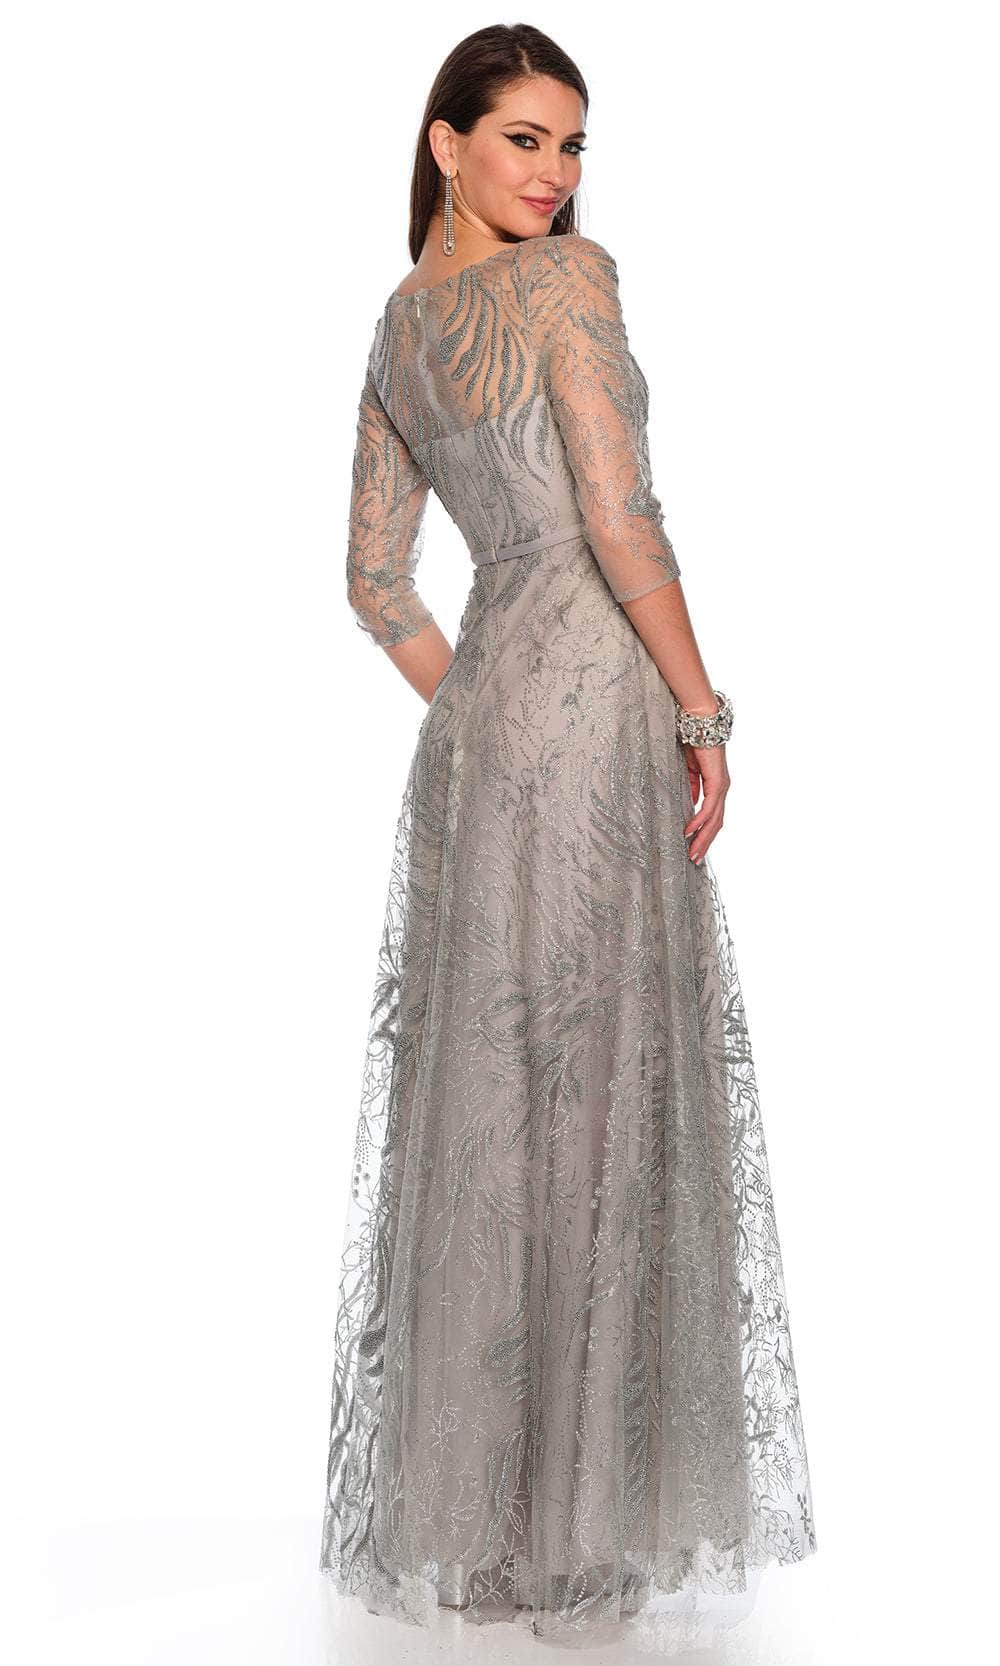 Dave & Johnny 11606 - Long Sleeve Glitter Gown Special Occasion Dress